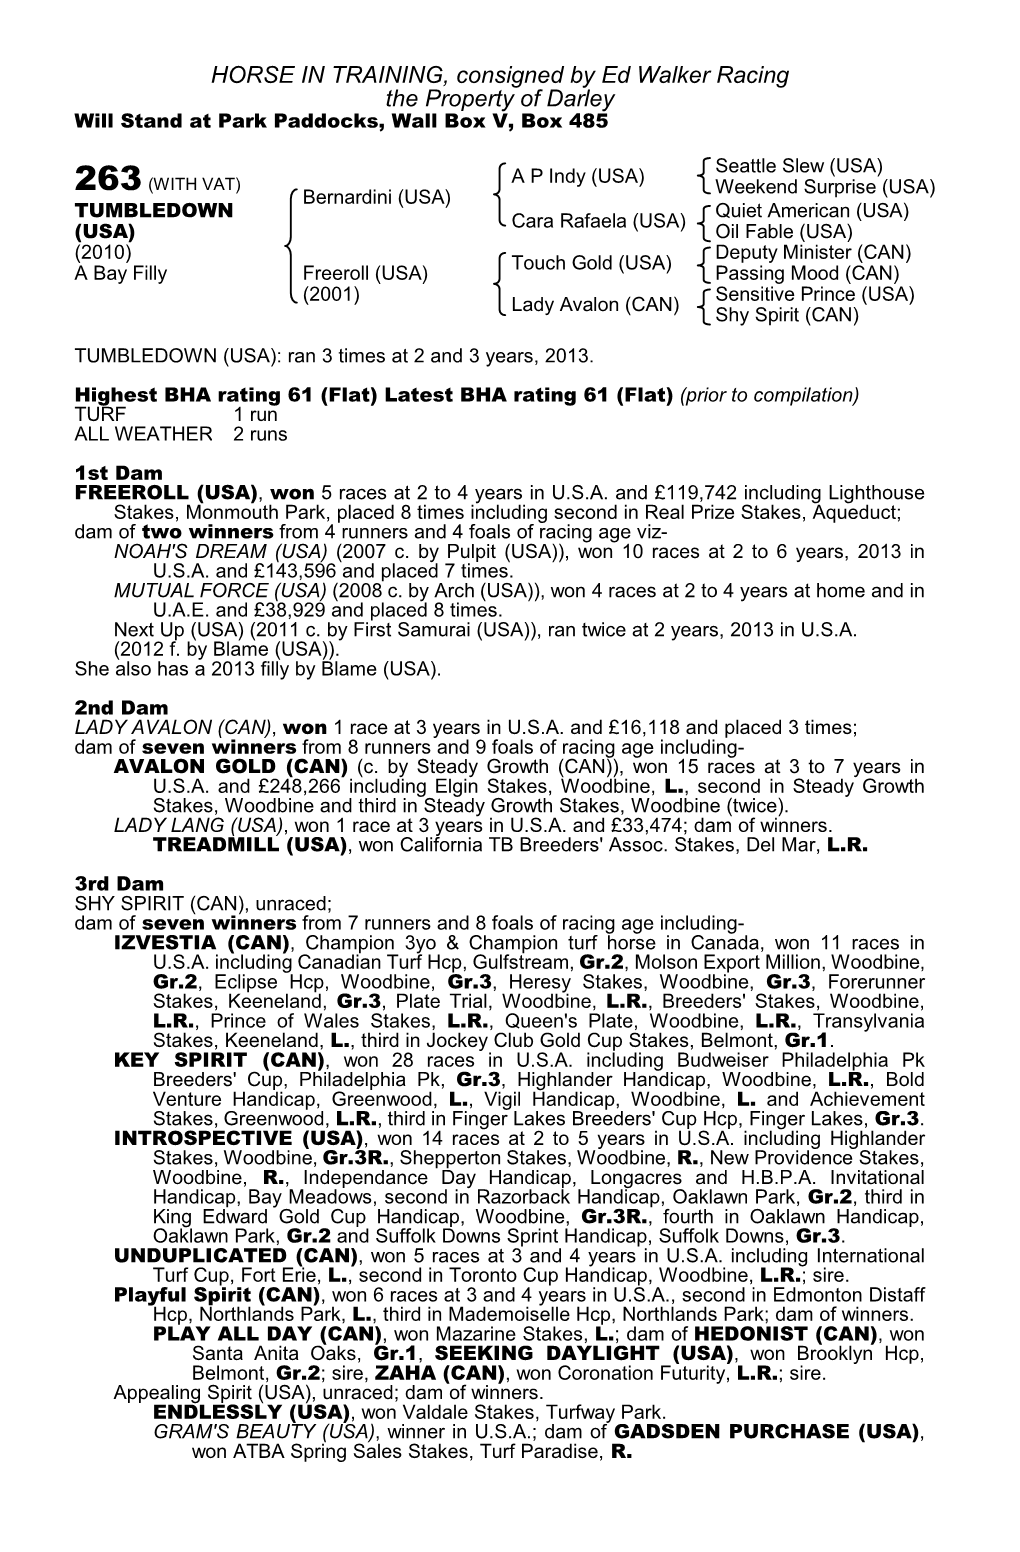 HORSE in TRAINING, Consigned by Ed Walker Racing the Property of Darley Will Stand at Park Paddocks, Wall Box V, Box 485